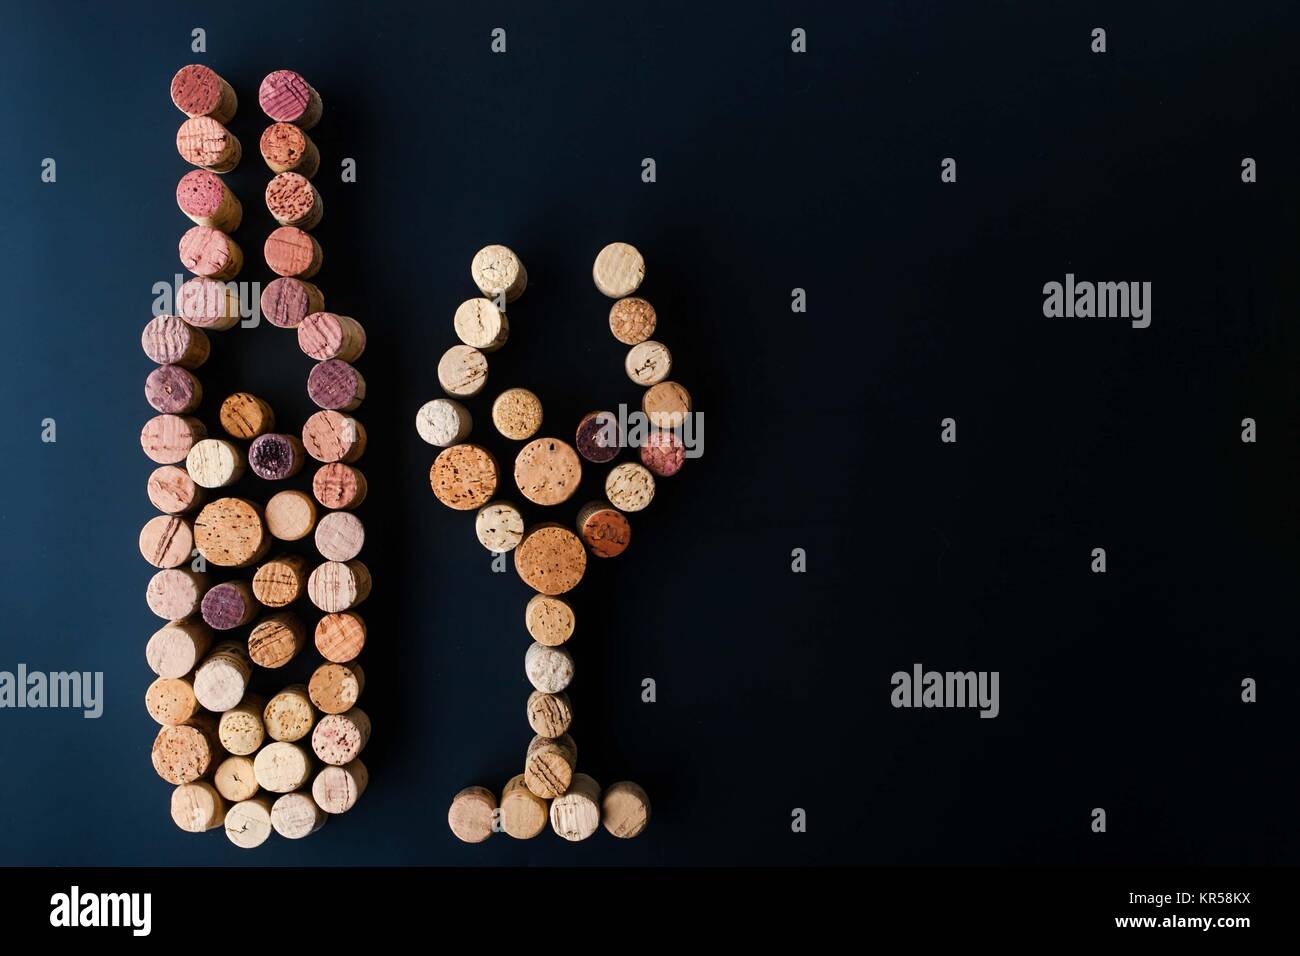 Wine bottle and glass made by corks horizontal Stock Photo